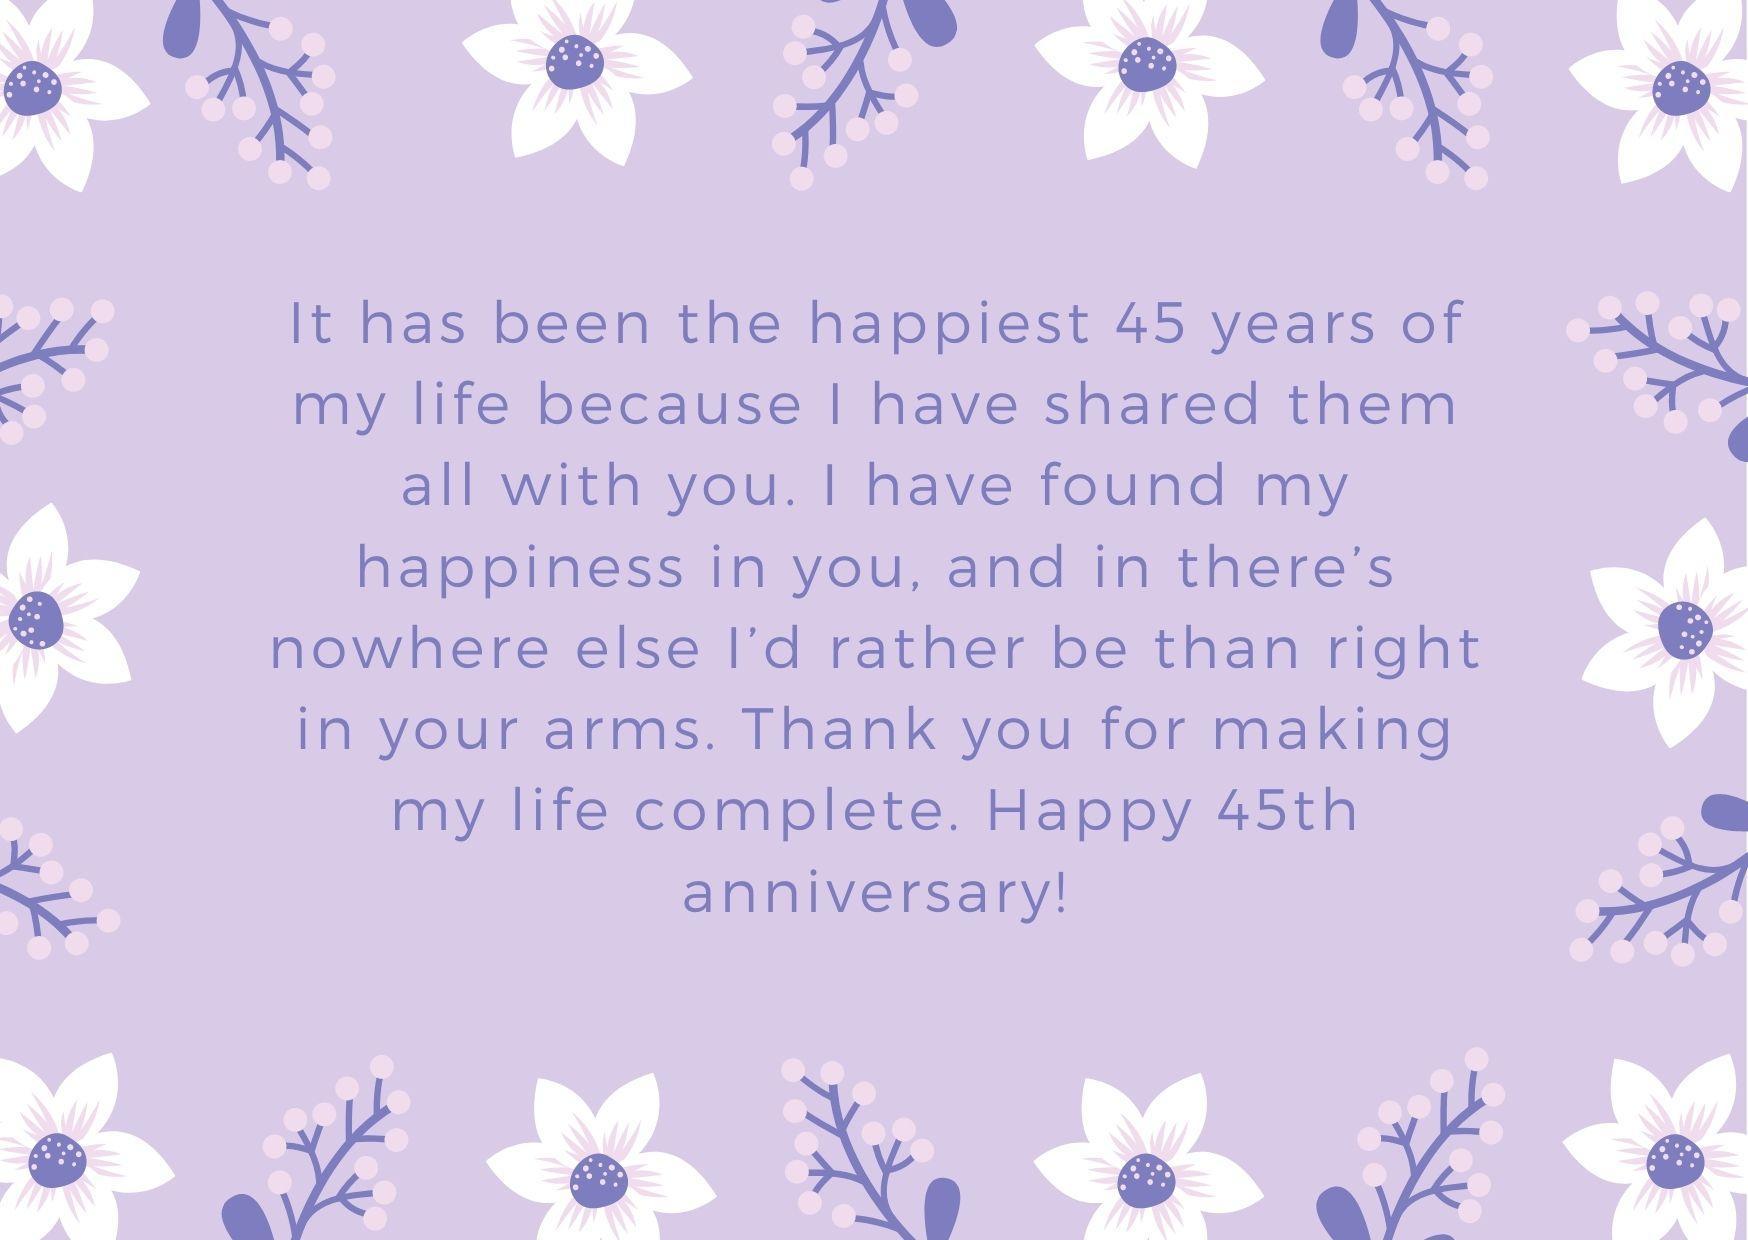 A violet 45th anniversary card for him